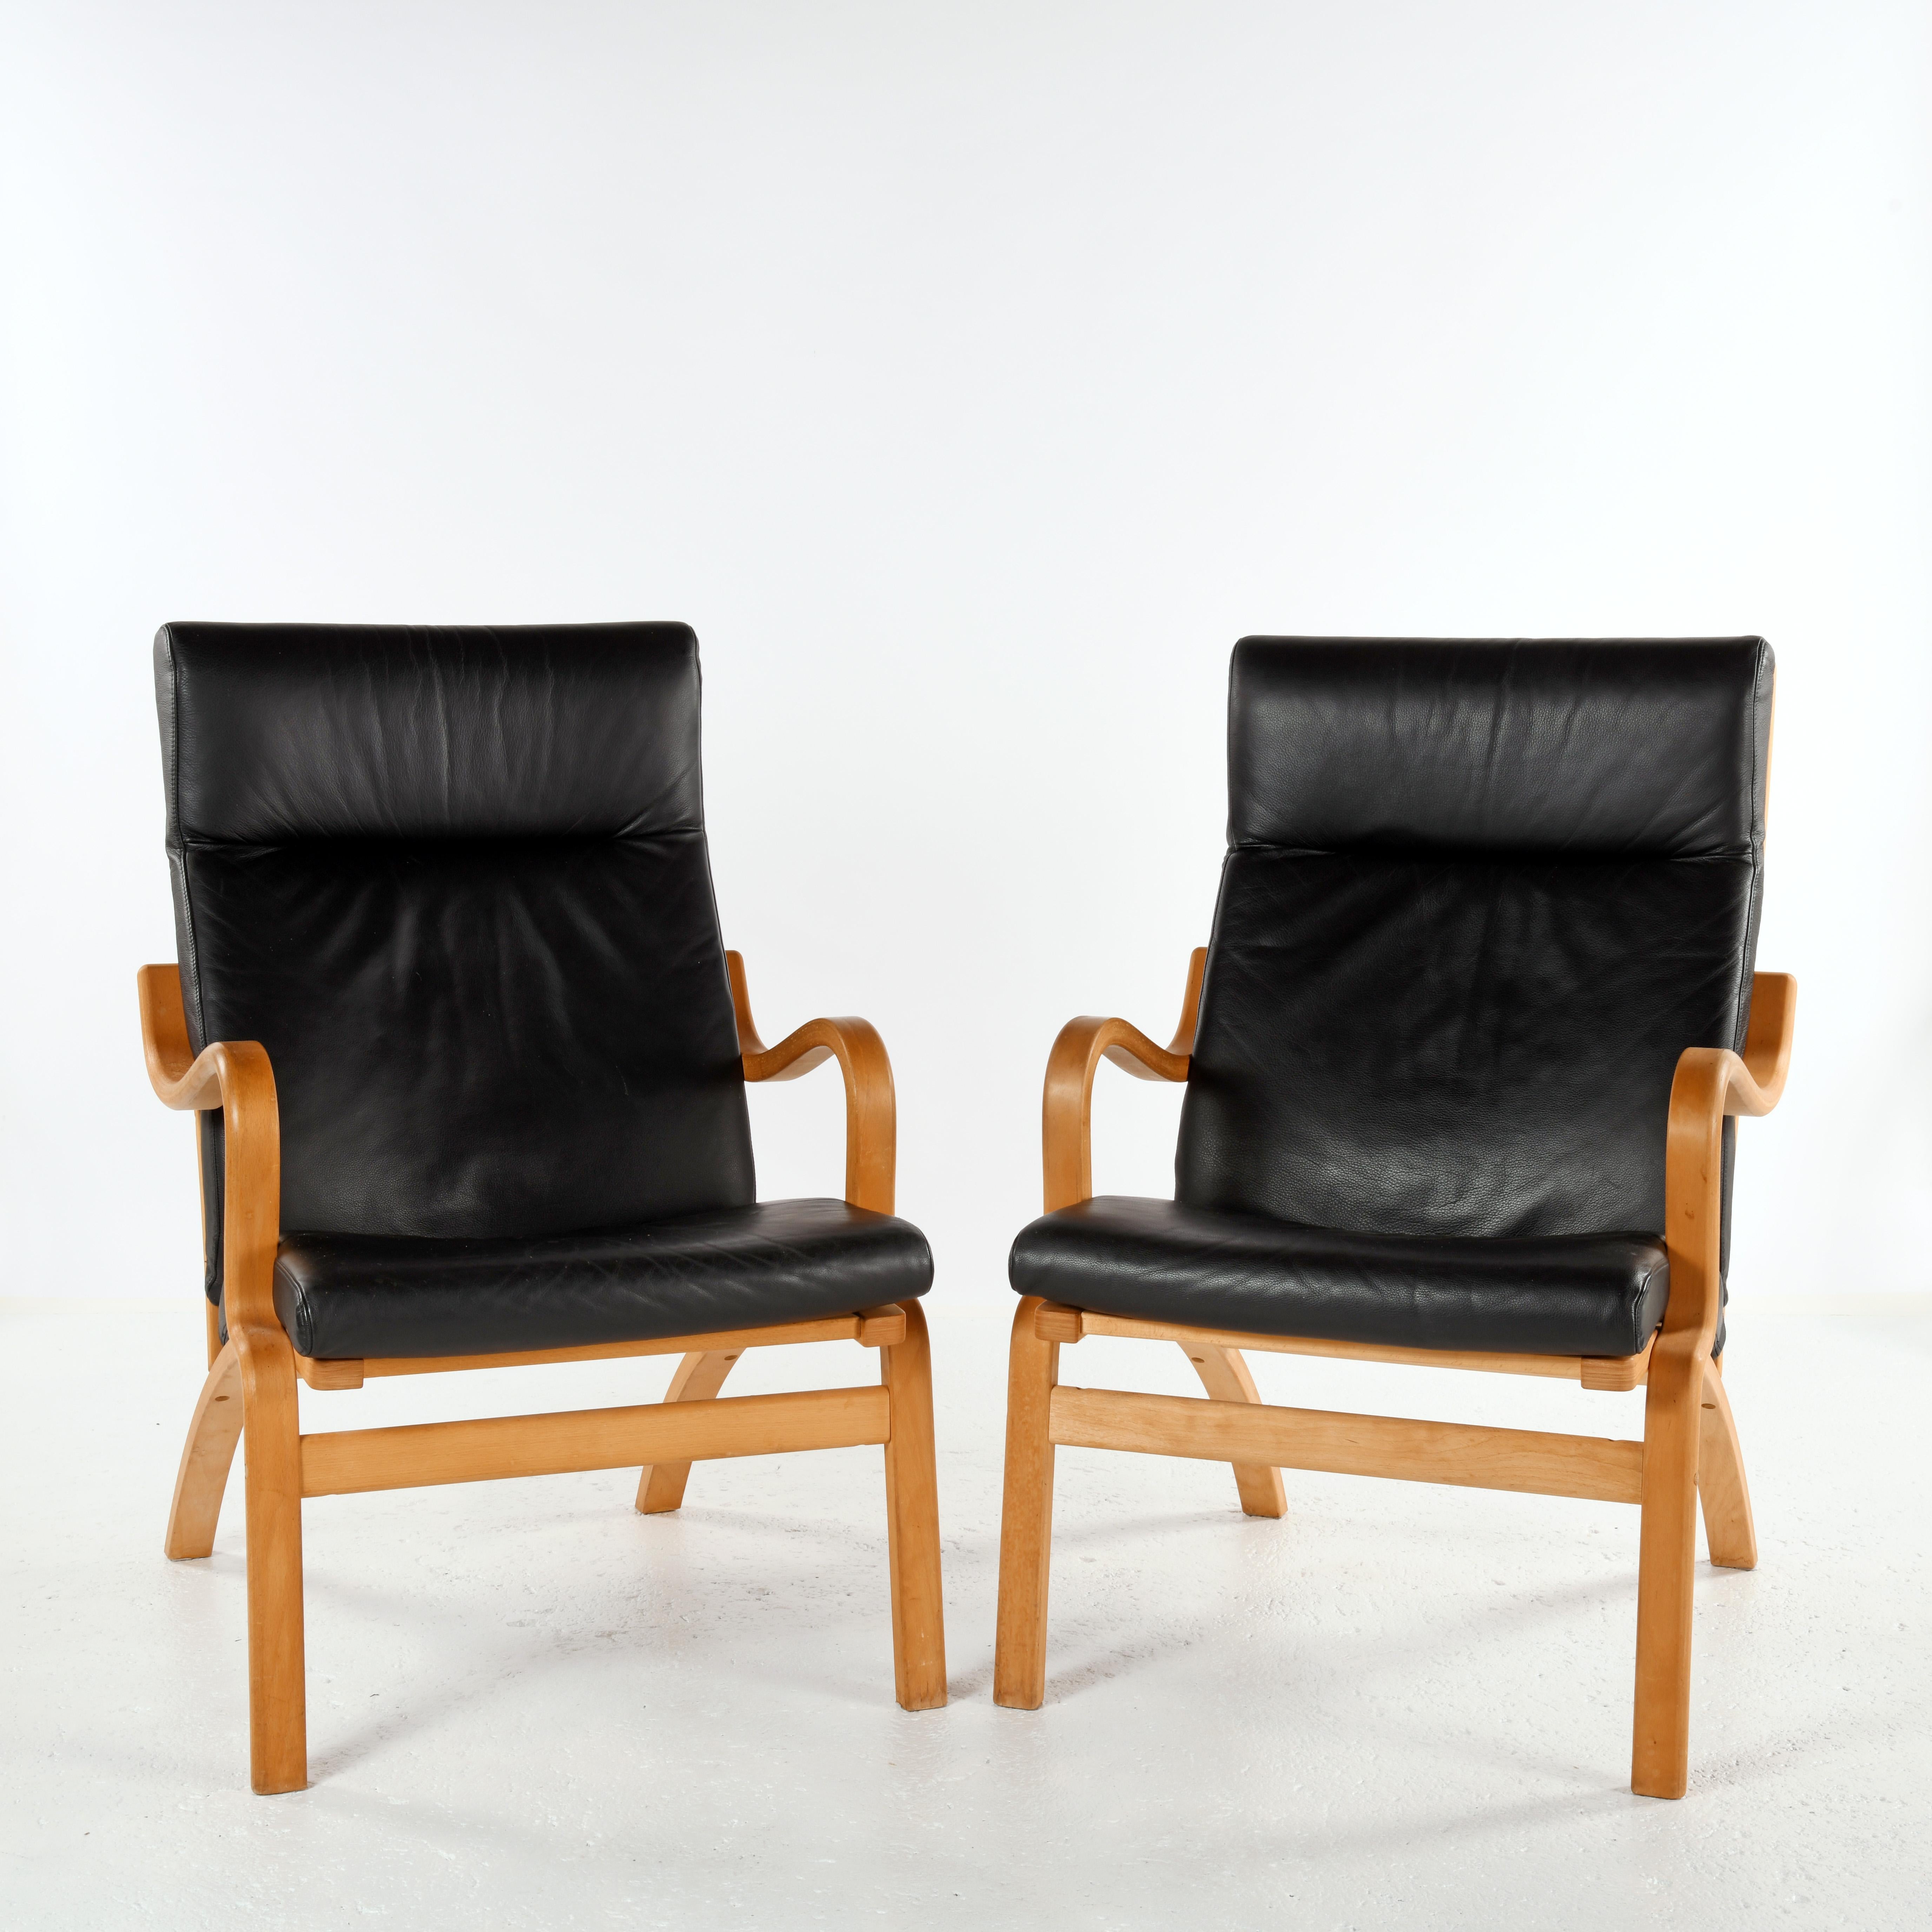 Scandinavian Modern Pair of danish armchair, curved multi-ply beech and black leather